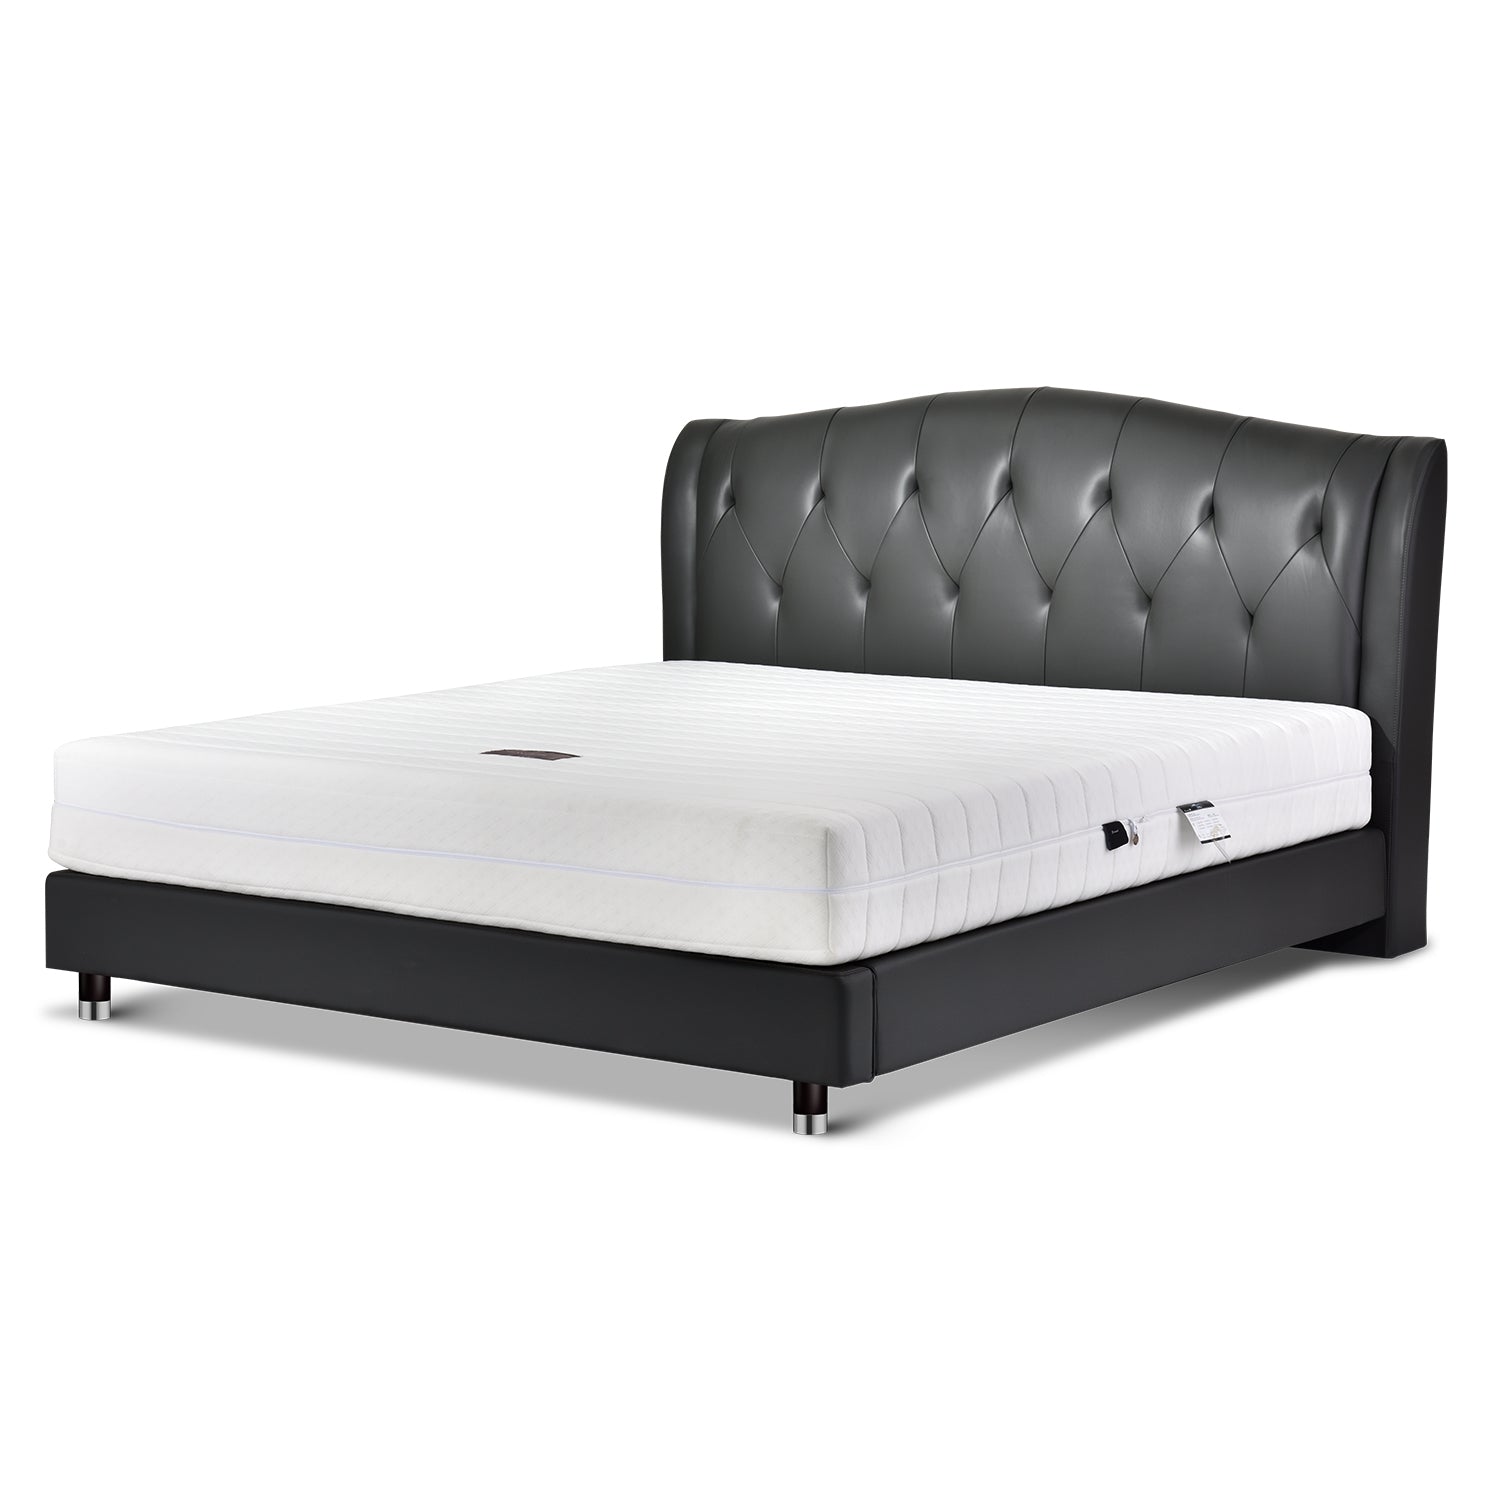 Black leather bed frame with tufted headboard and white mattress, inspired by modern European style, from DeRUCCI's high-quality bedroom furniture collection.